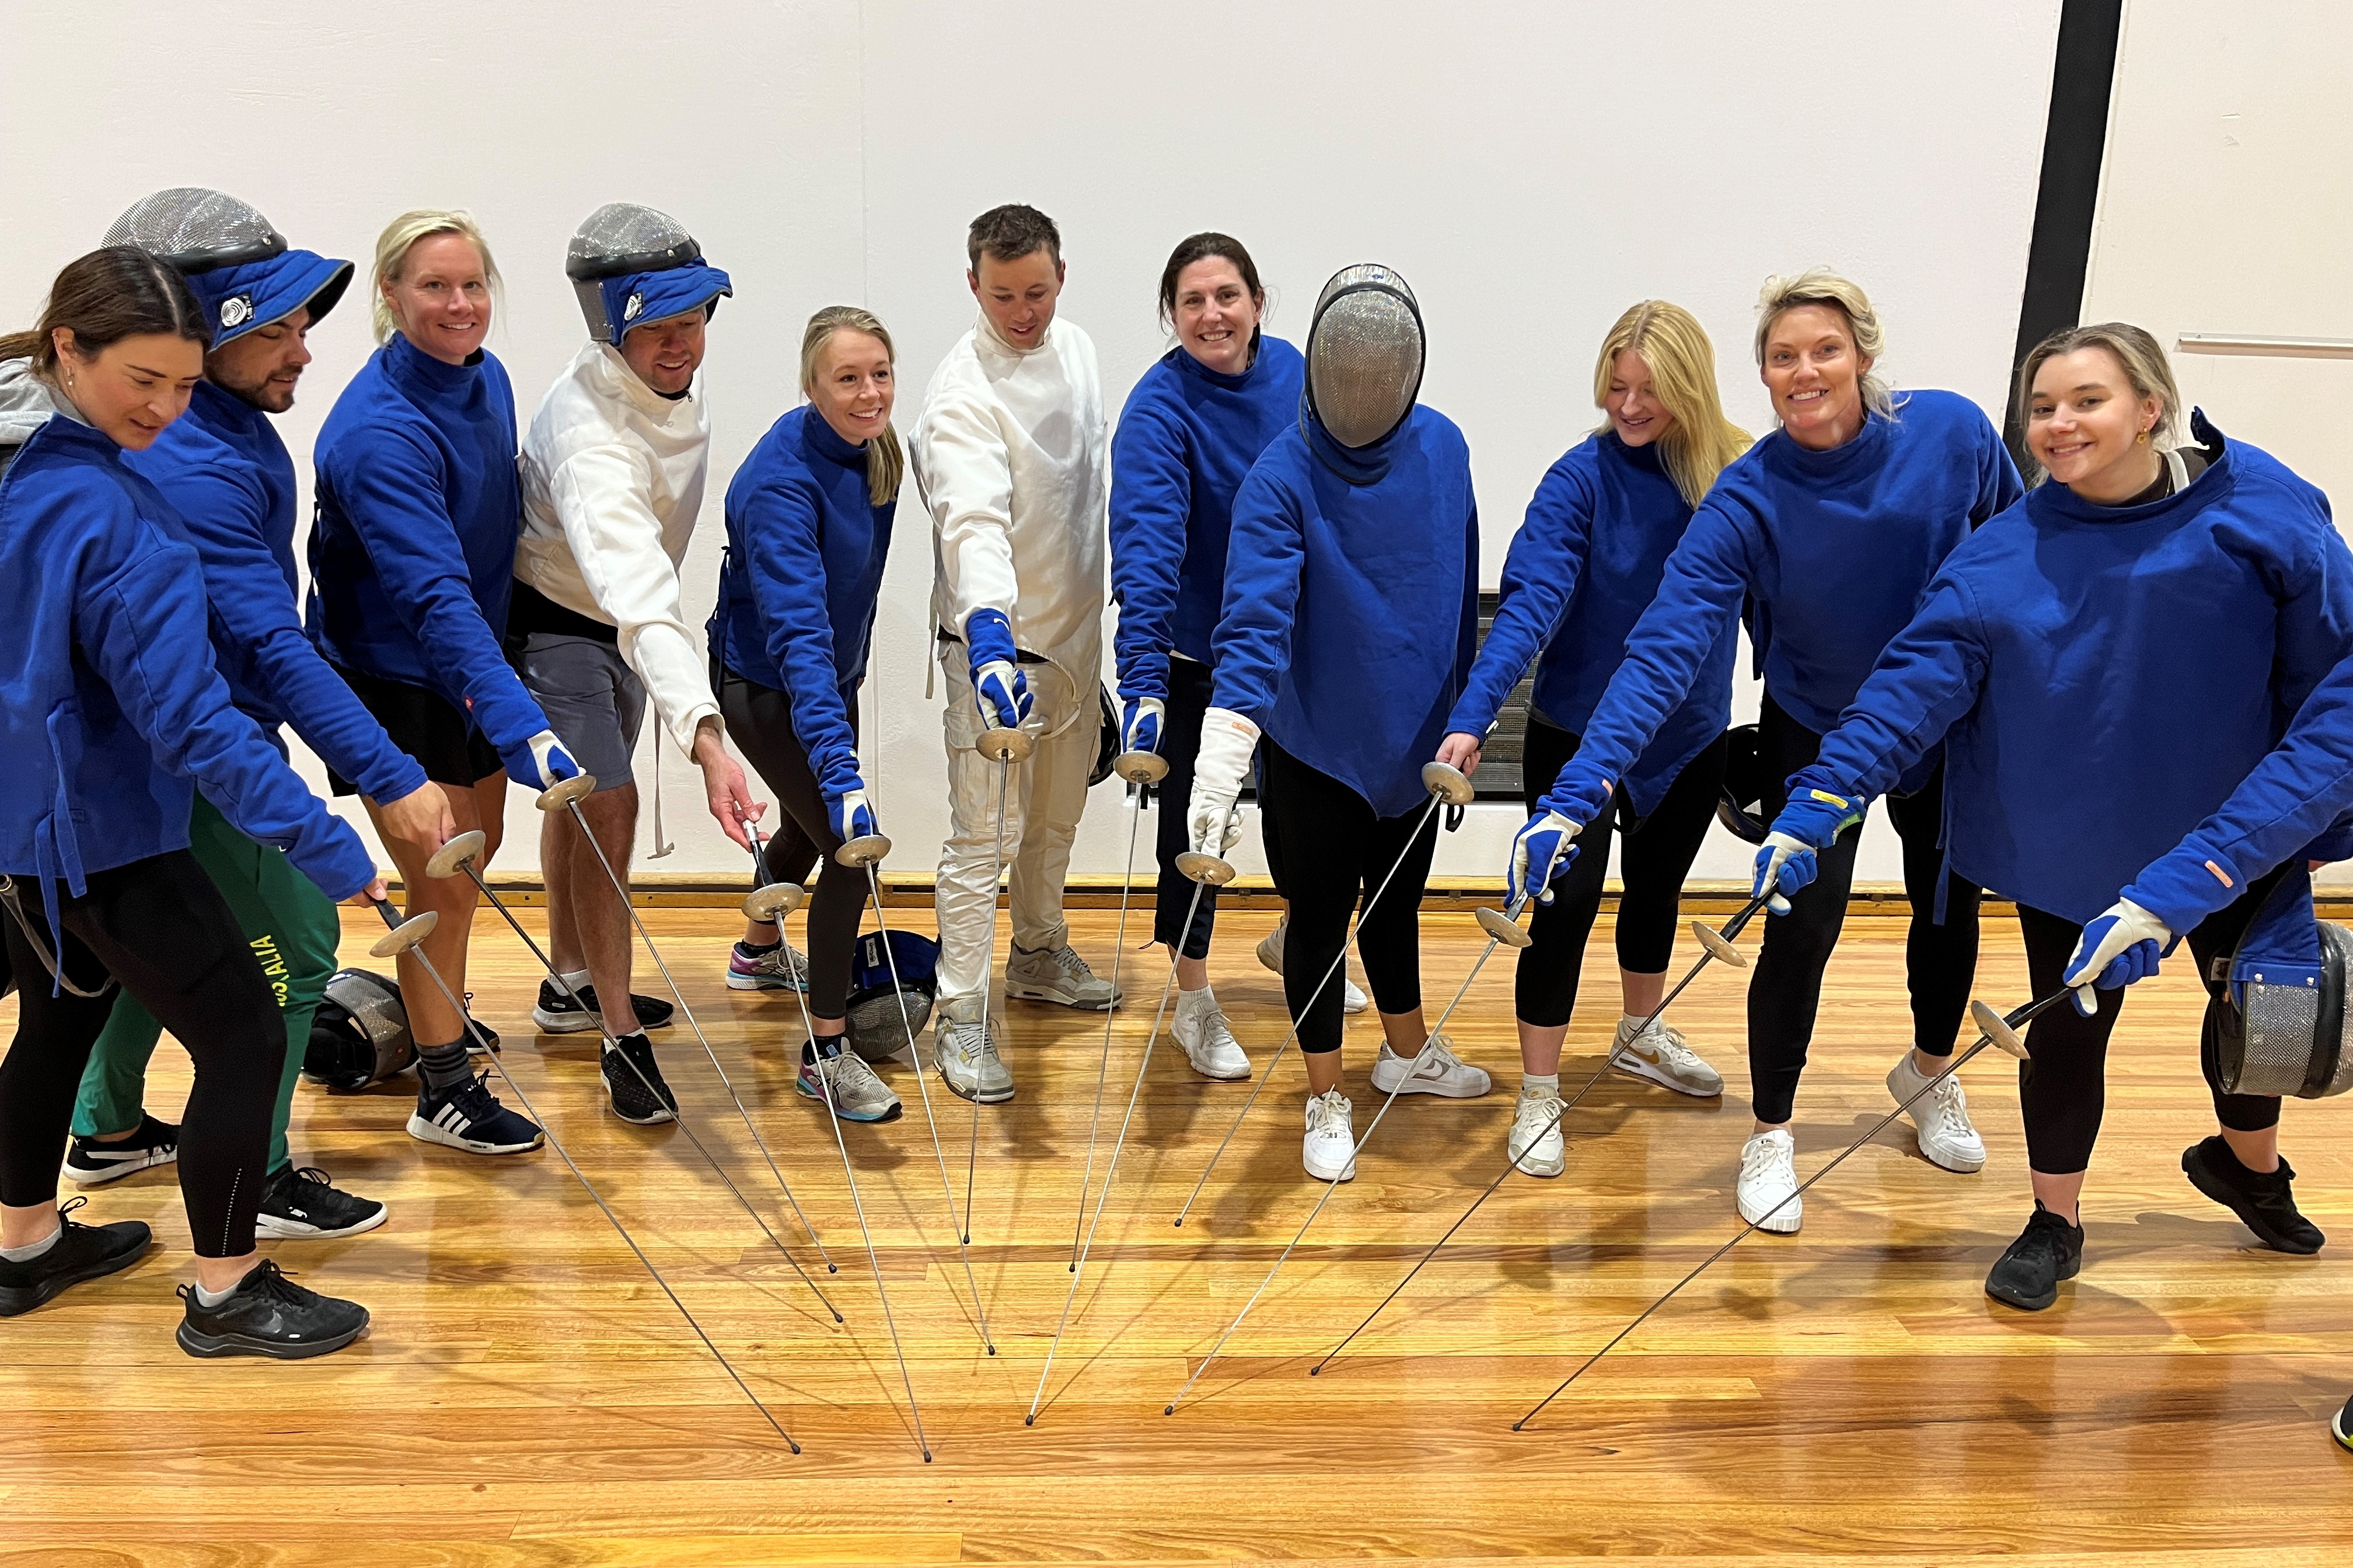 Coaches stand in group dressed in fencing uniform.